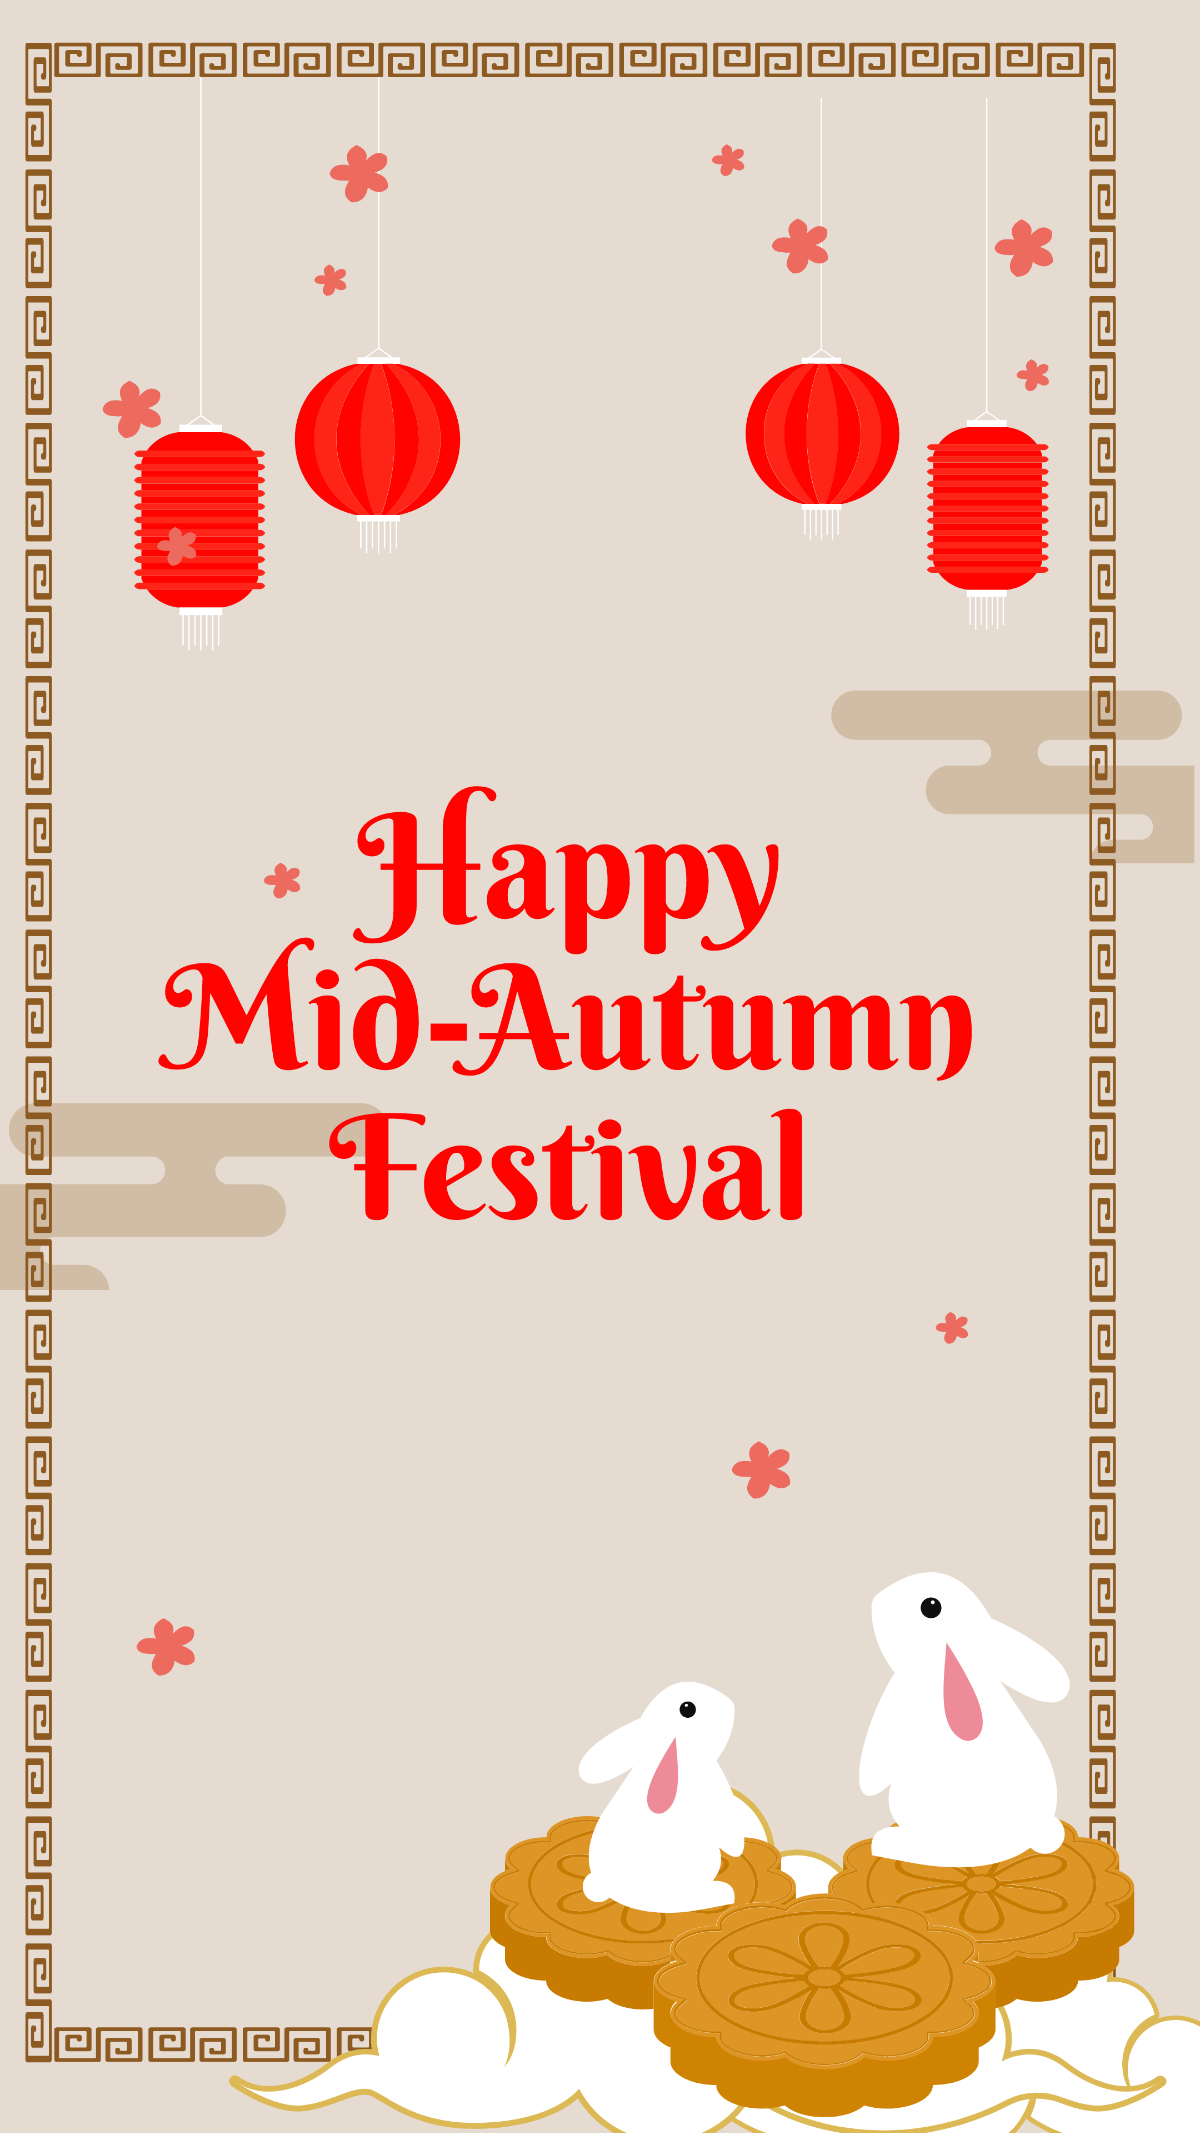 Free Mid-Autumn Festival iPhone background Template